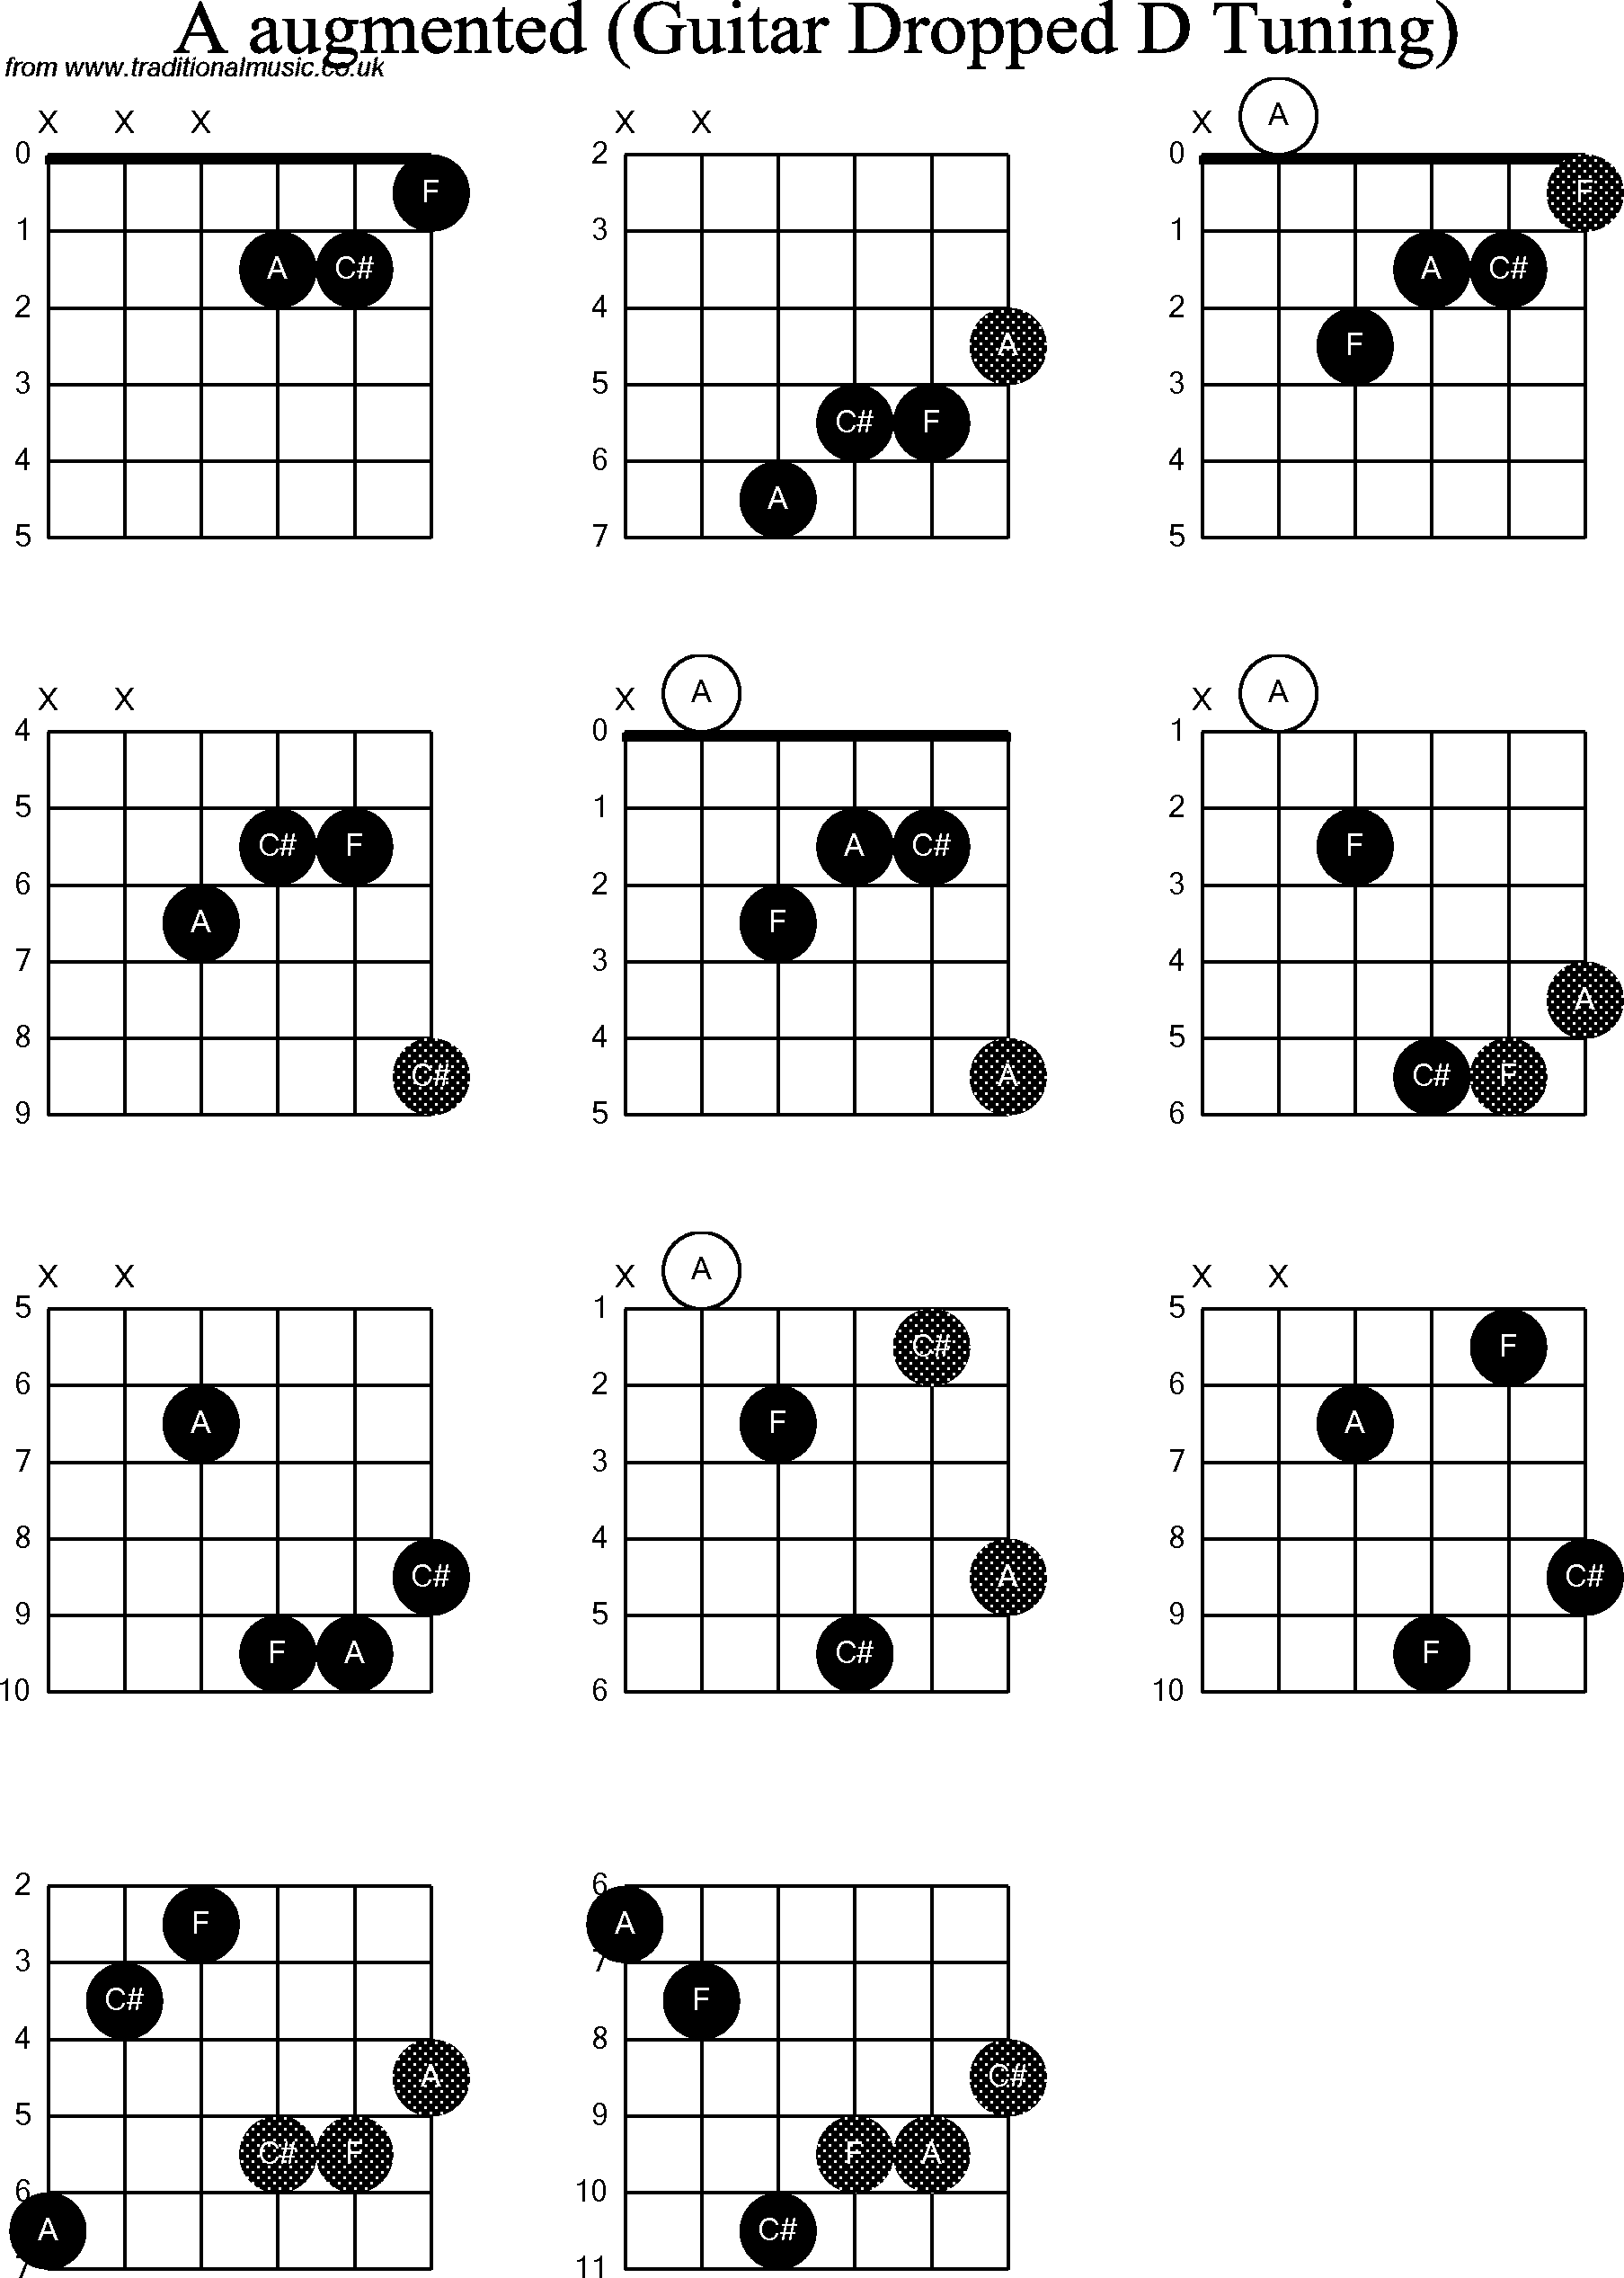 Chord diagrams for dropped D Guitar(DADGBE), A Augmented